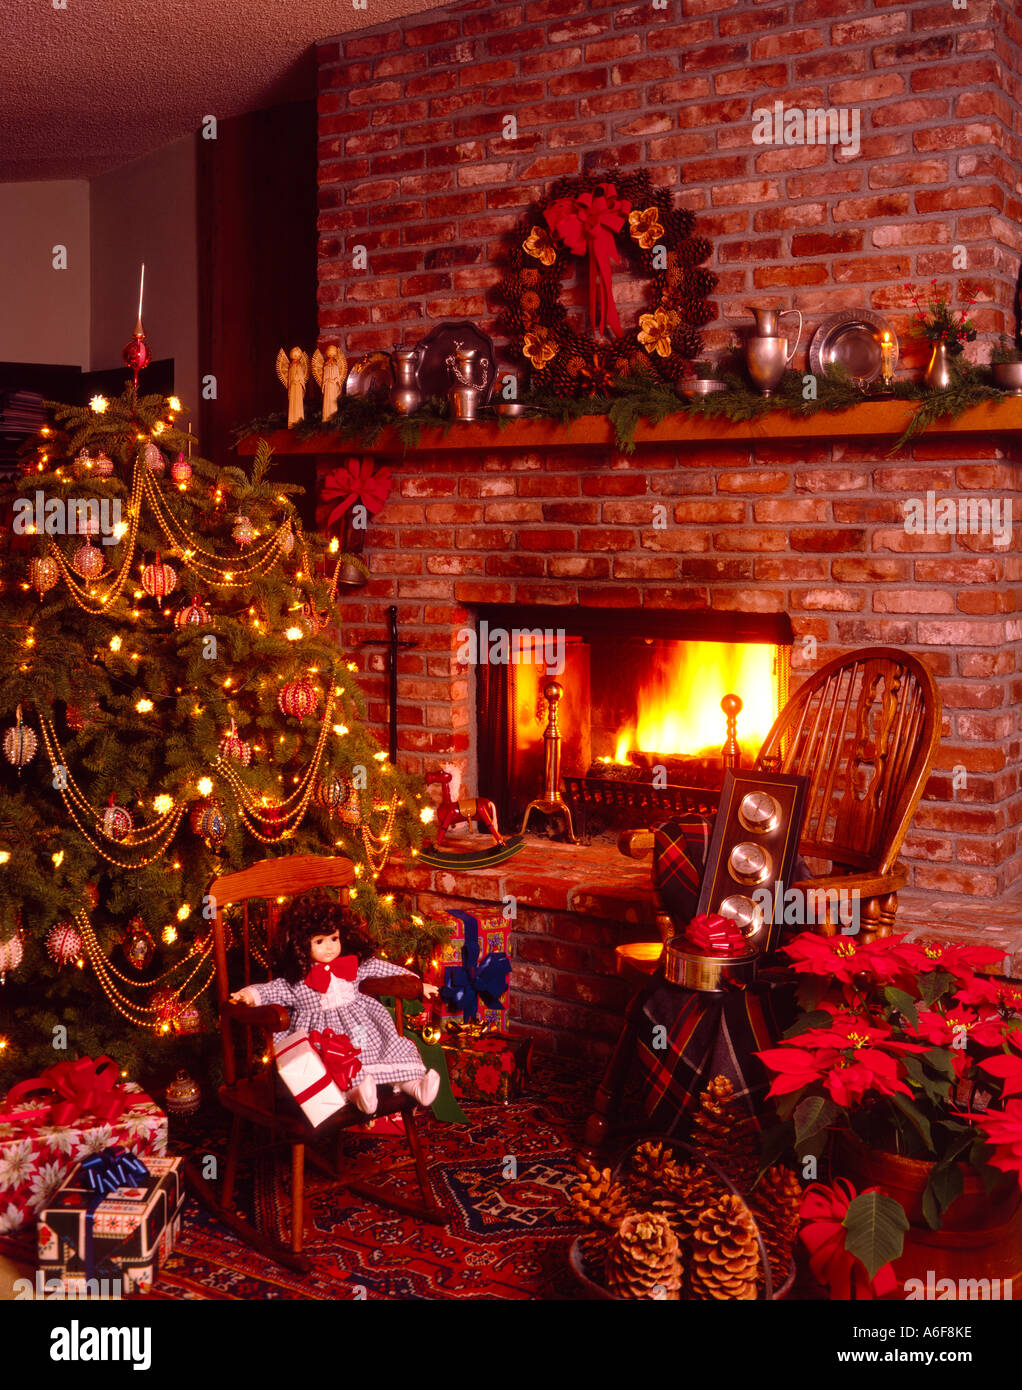 Cheerful Christmas fireplace scene with decorated tree and festive ...